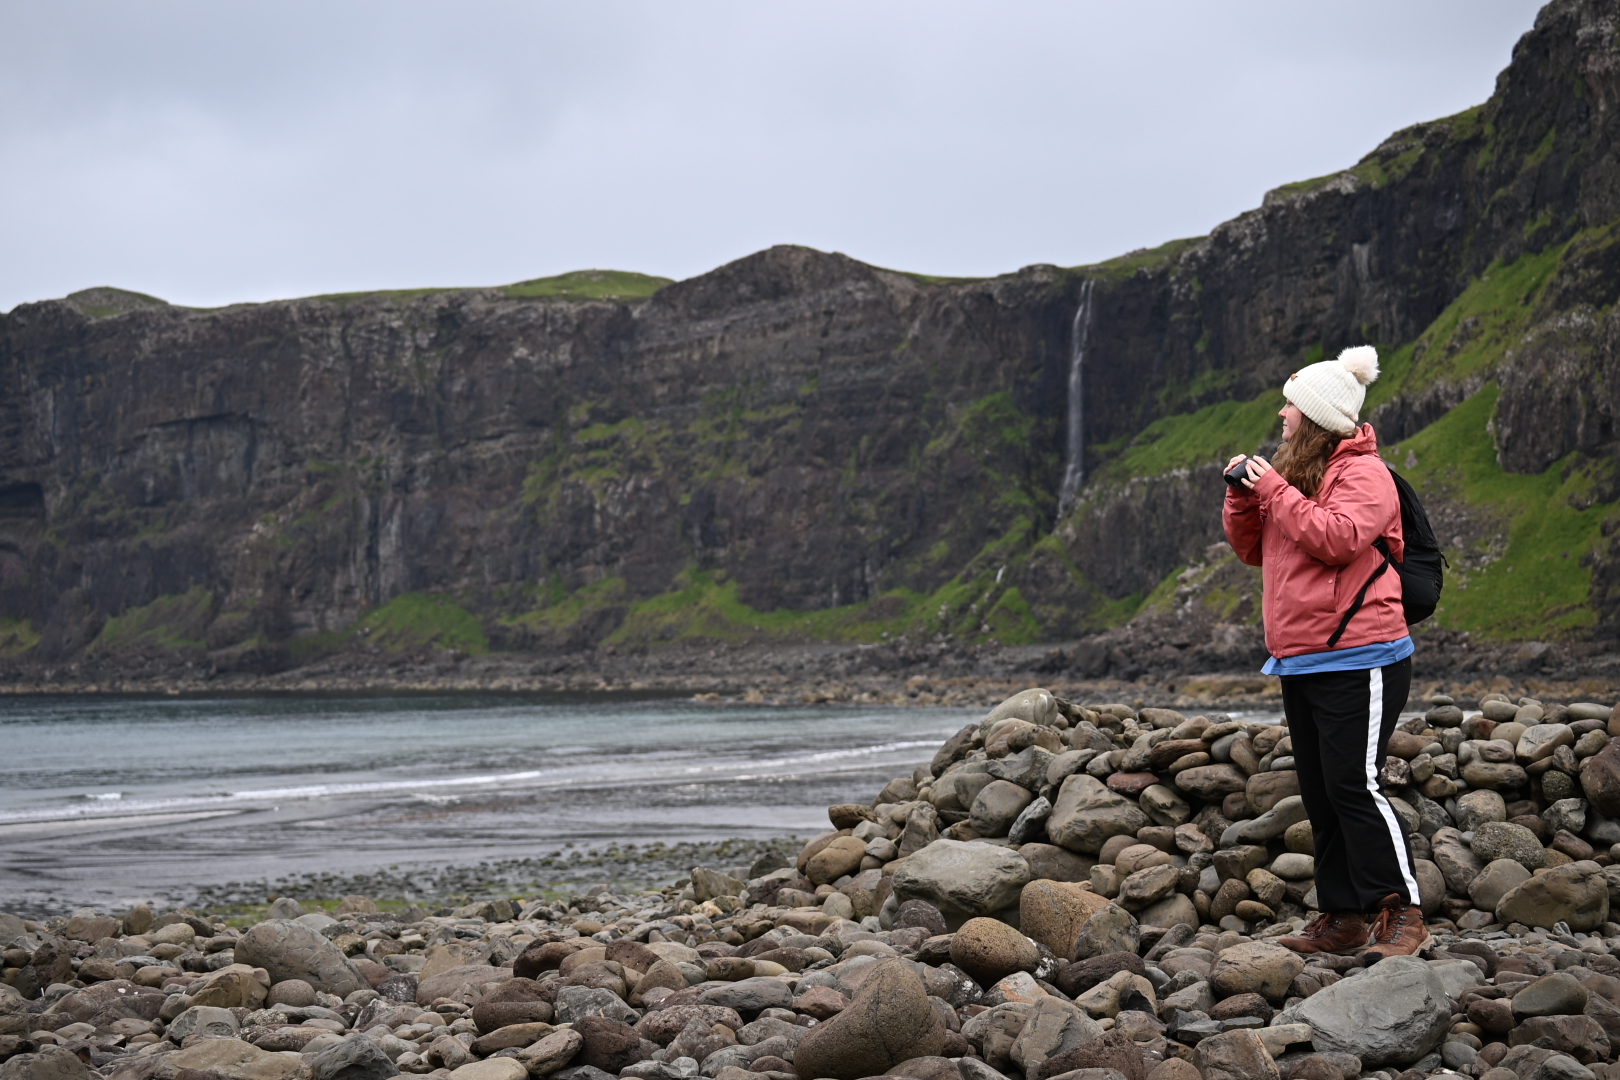 Image shows a woman dressed in winter clothing holding binoculars and standing on a rocky beach with a large waterfall in the background.